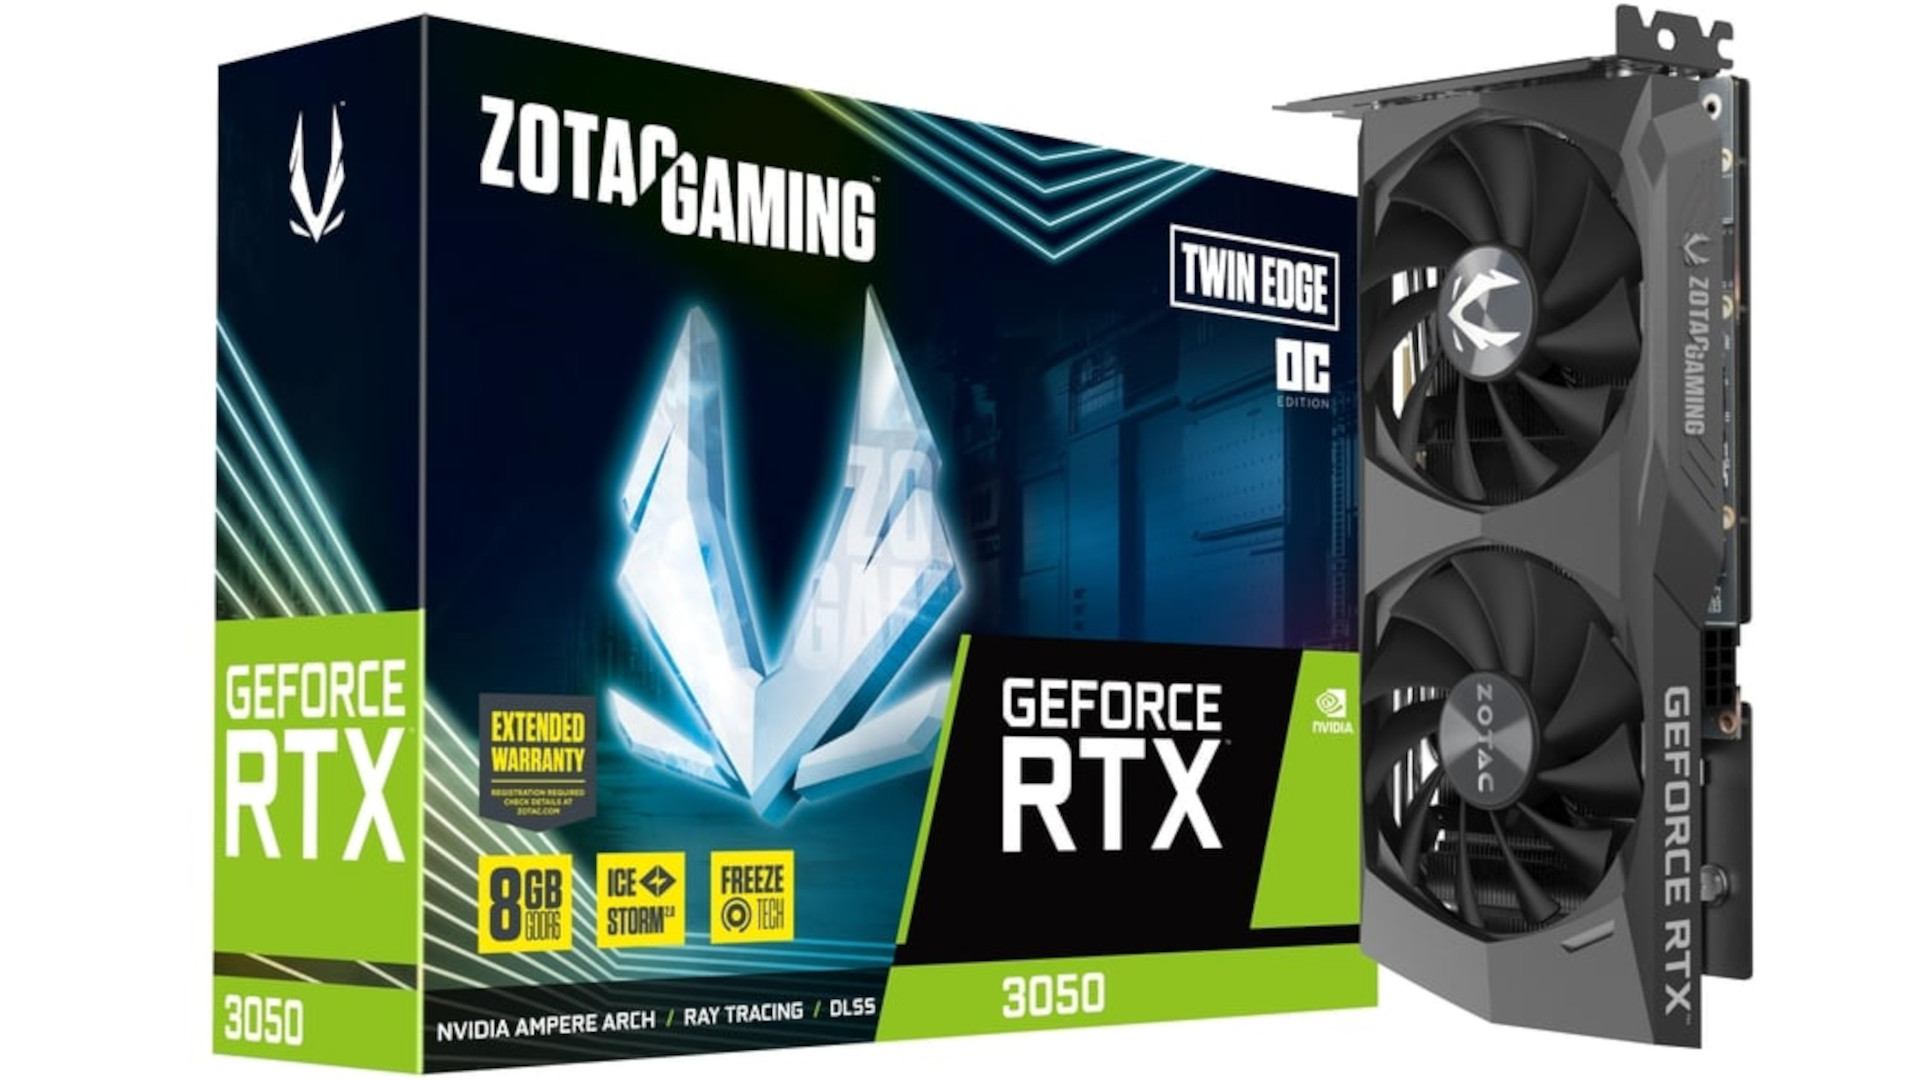 You are currently viewing ZOTAC Gaming GeForce RTX 3050 Twin Edge OC Review